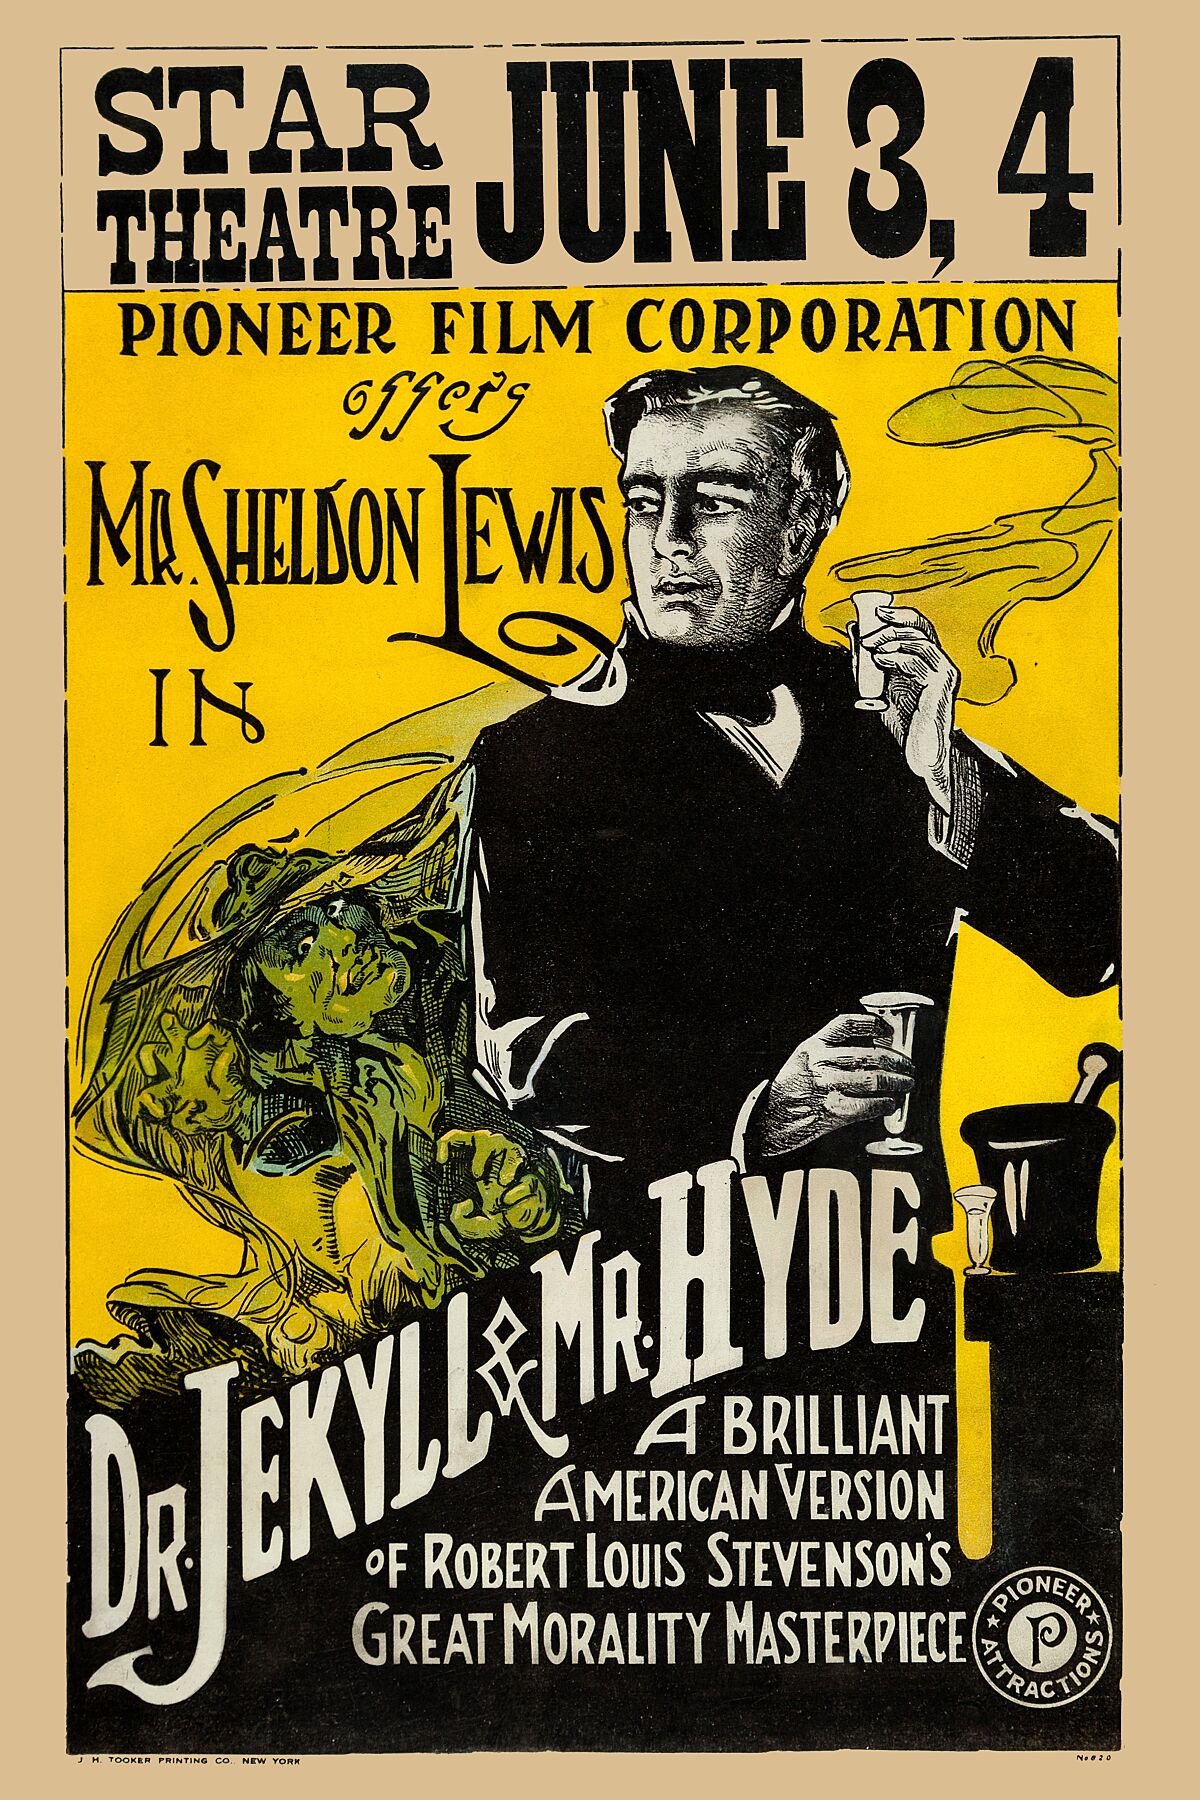 Dr. Jekyll and Mr. Hyde is a 1920 horror film directed and written by J. Charles Haydon, starring Sheldon Lewis, based on the 1886 novel Strange Case of Dr. Jekyll and Mr. Hyde by Robert Louis Stevenson